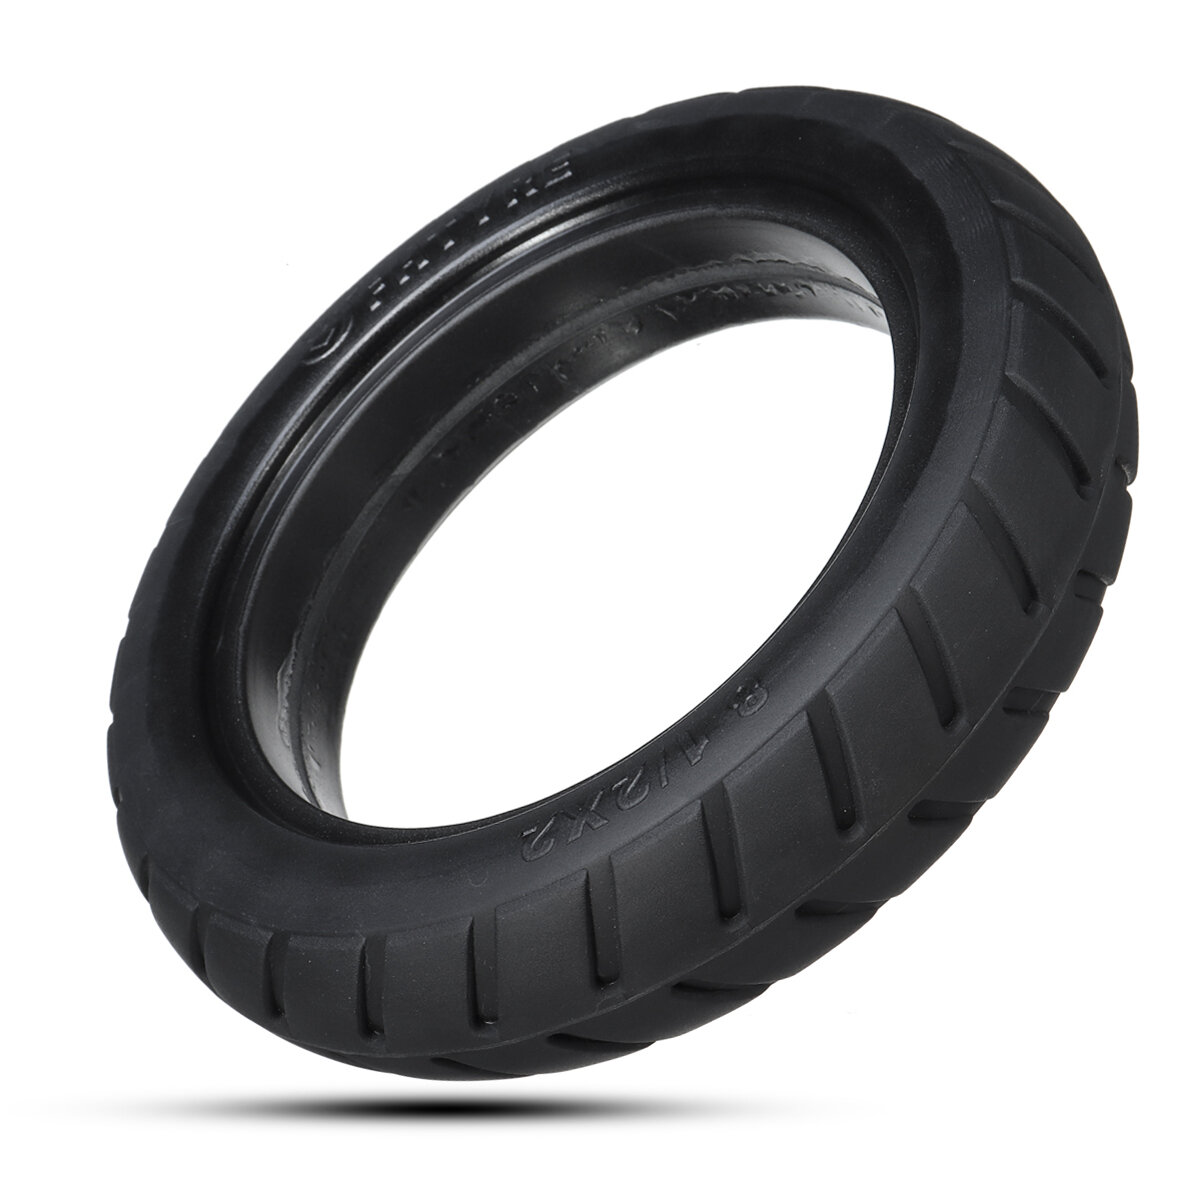 BIKIGHT 1pc 8 1/2 X 2 Scooter Solid Tire For M365 Electric Scooter, Banggood  - buy with discount